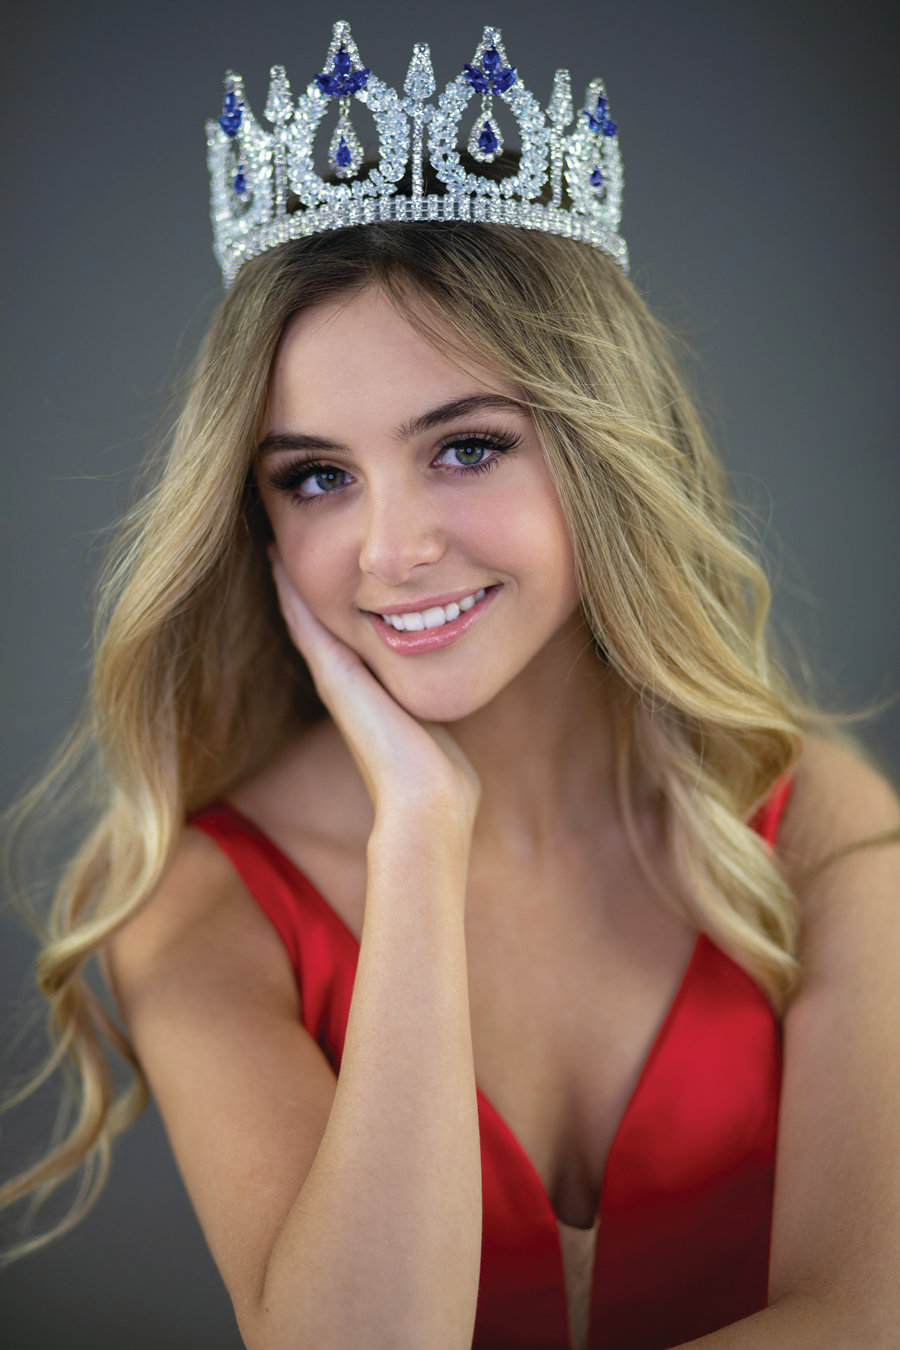 CLASSIC CROWN: Miss Teen Rhode Island North America Sophia Skaltsis, who lives in Warwick and attends The Prout School in South Kingstown, is all smiles while wearing her prestigious crown.